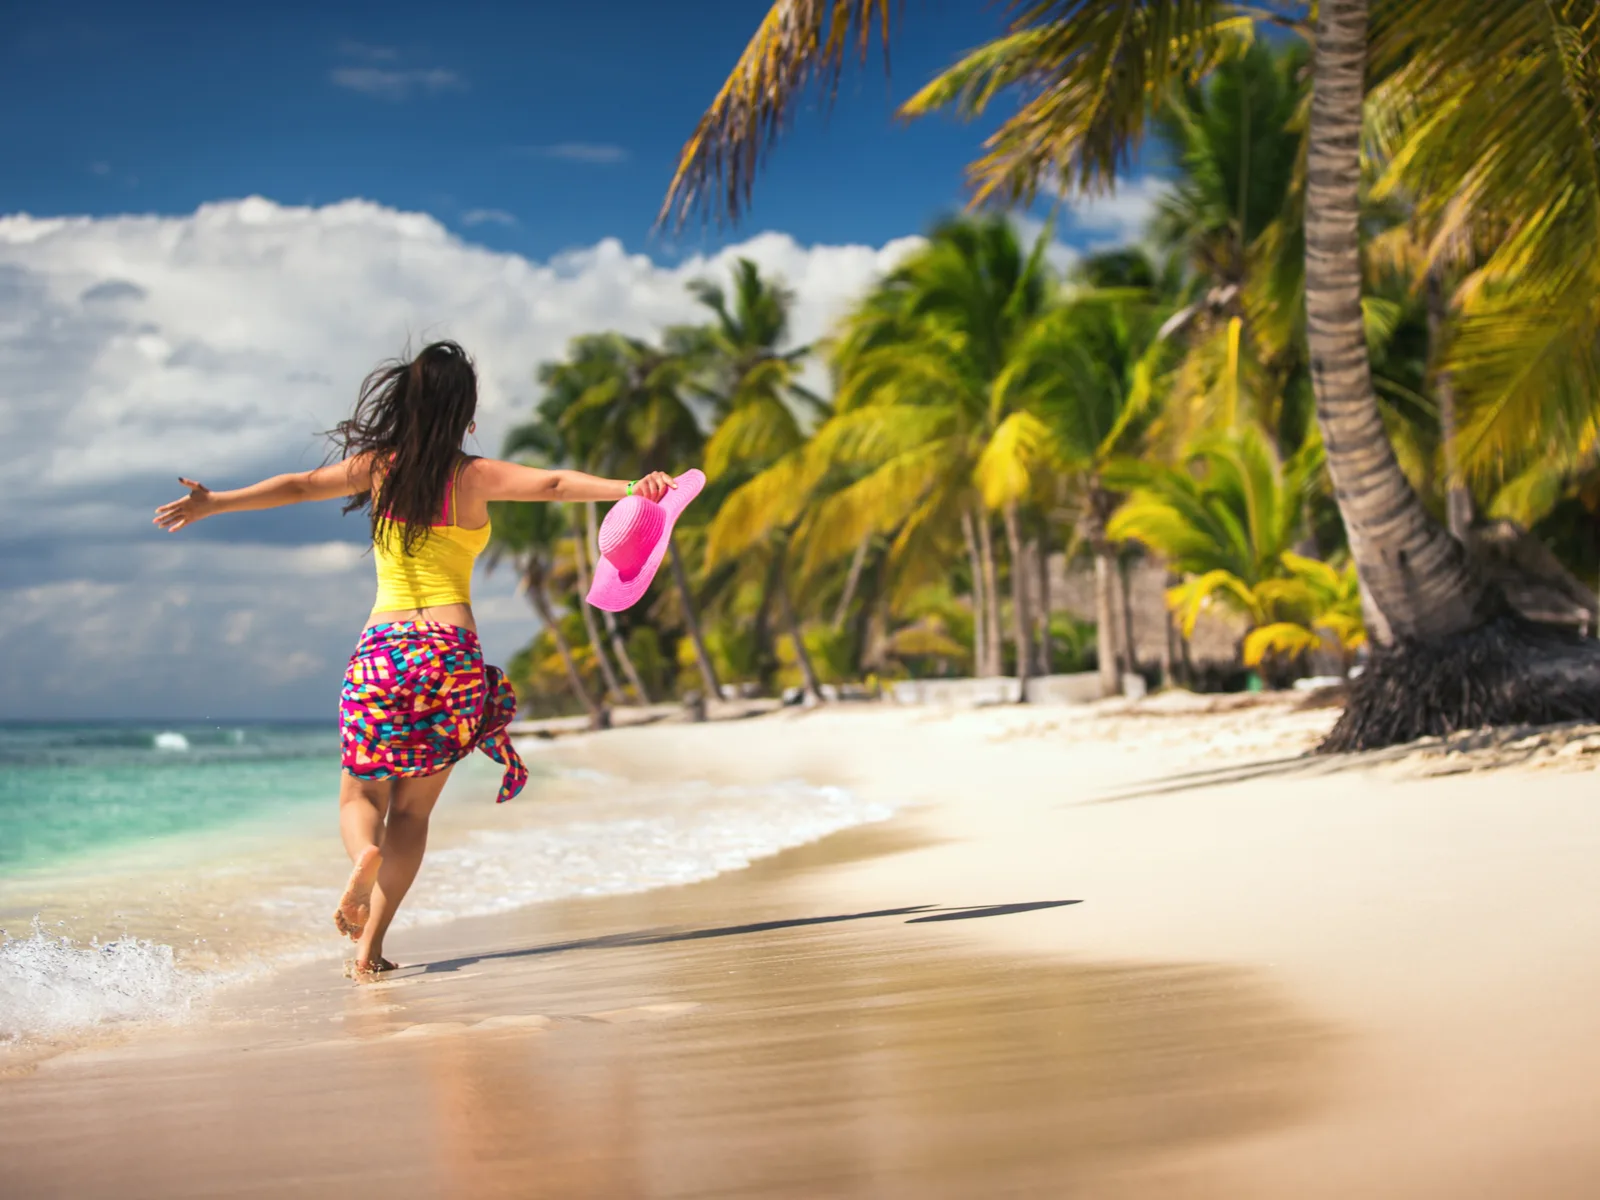 Carefree woman in a yellow shirt running along the beach next to palm trees during the best time to visit Punta Cana